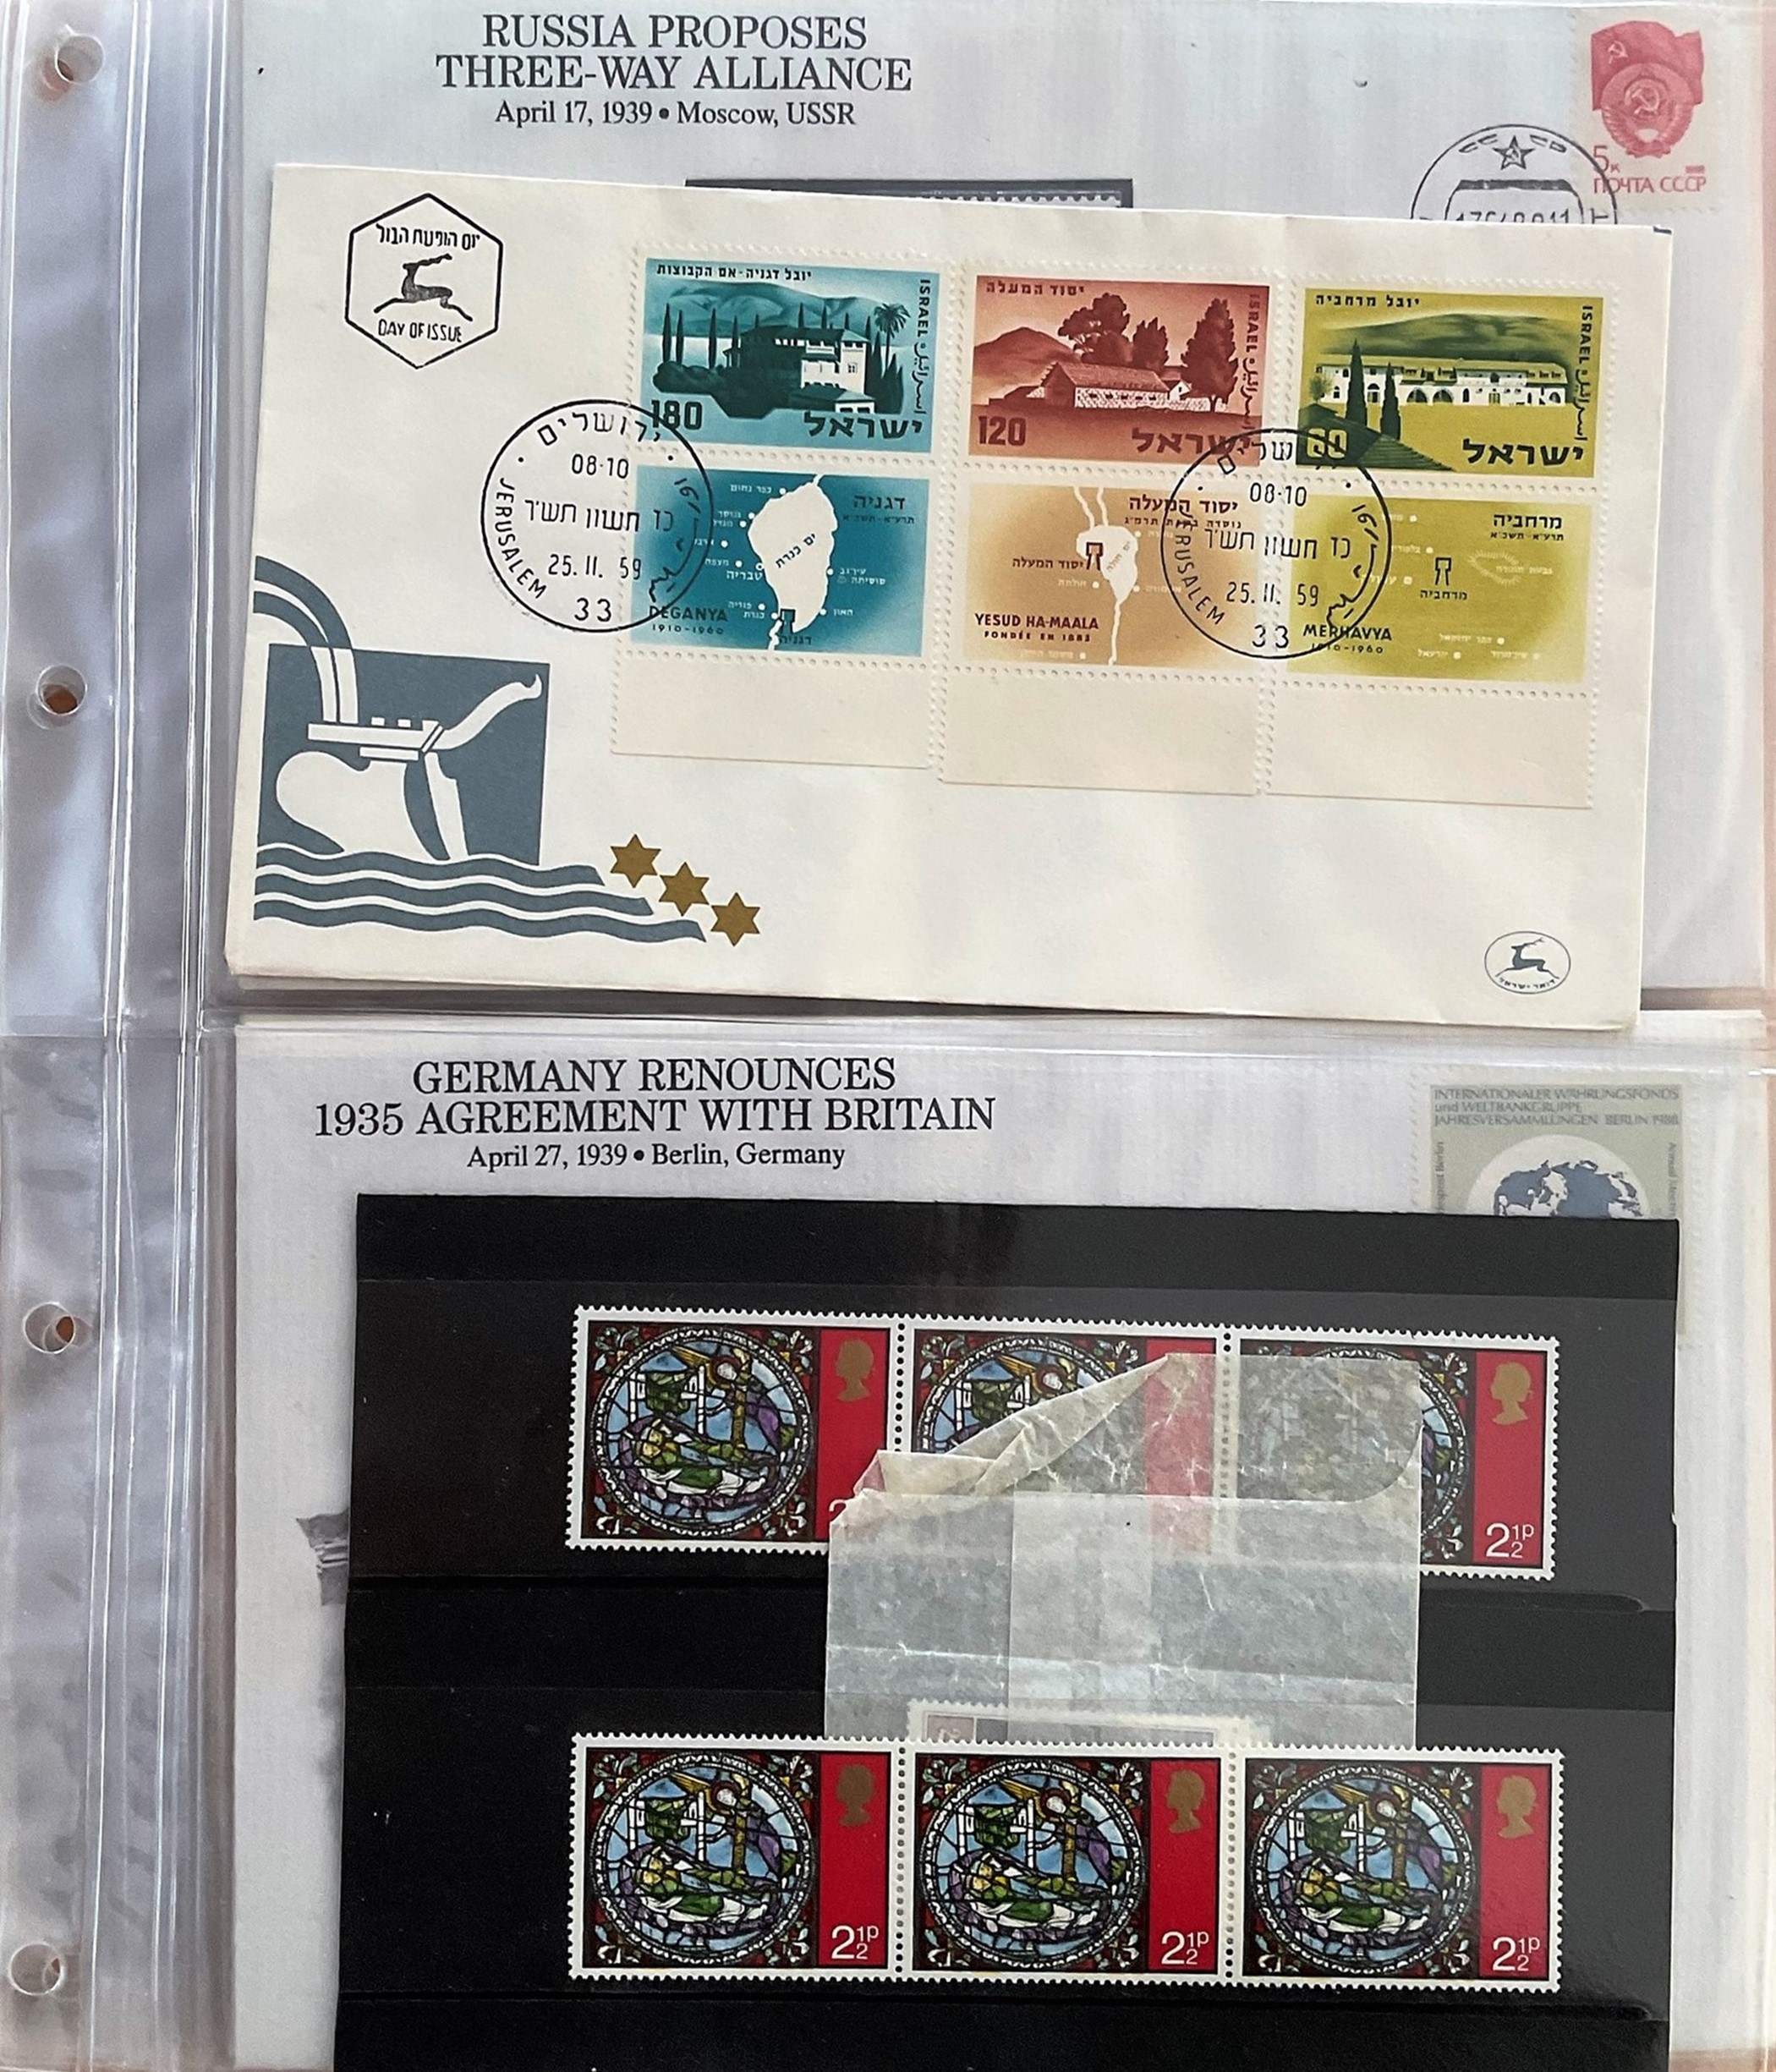 16 Danbury Mint FDC with Stamps and FDI Postmarks (all Include A Mint Stamp) plus 5 Assorted FDC, - Image 5 of 5